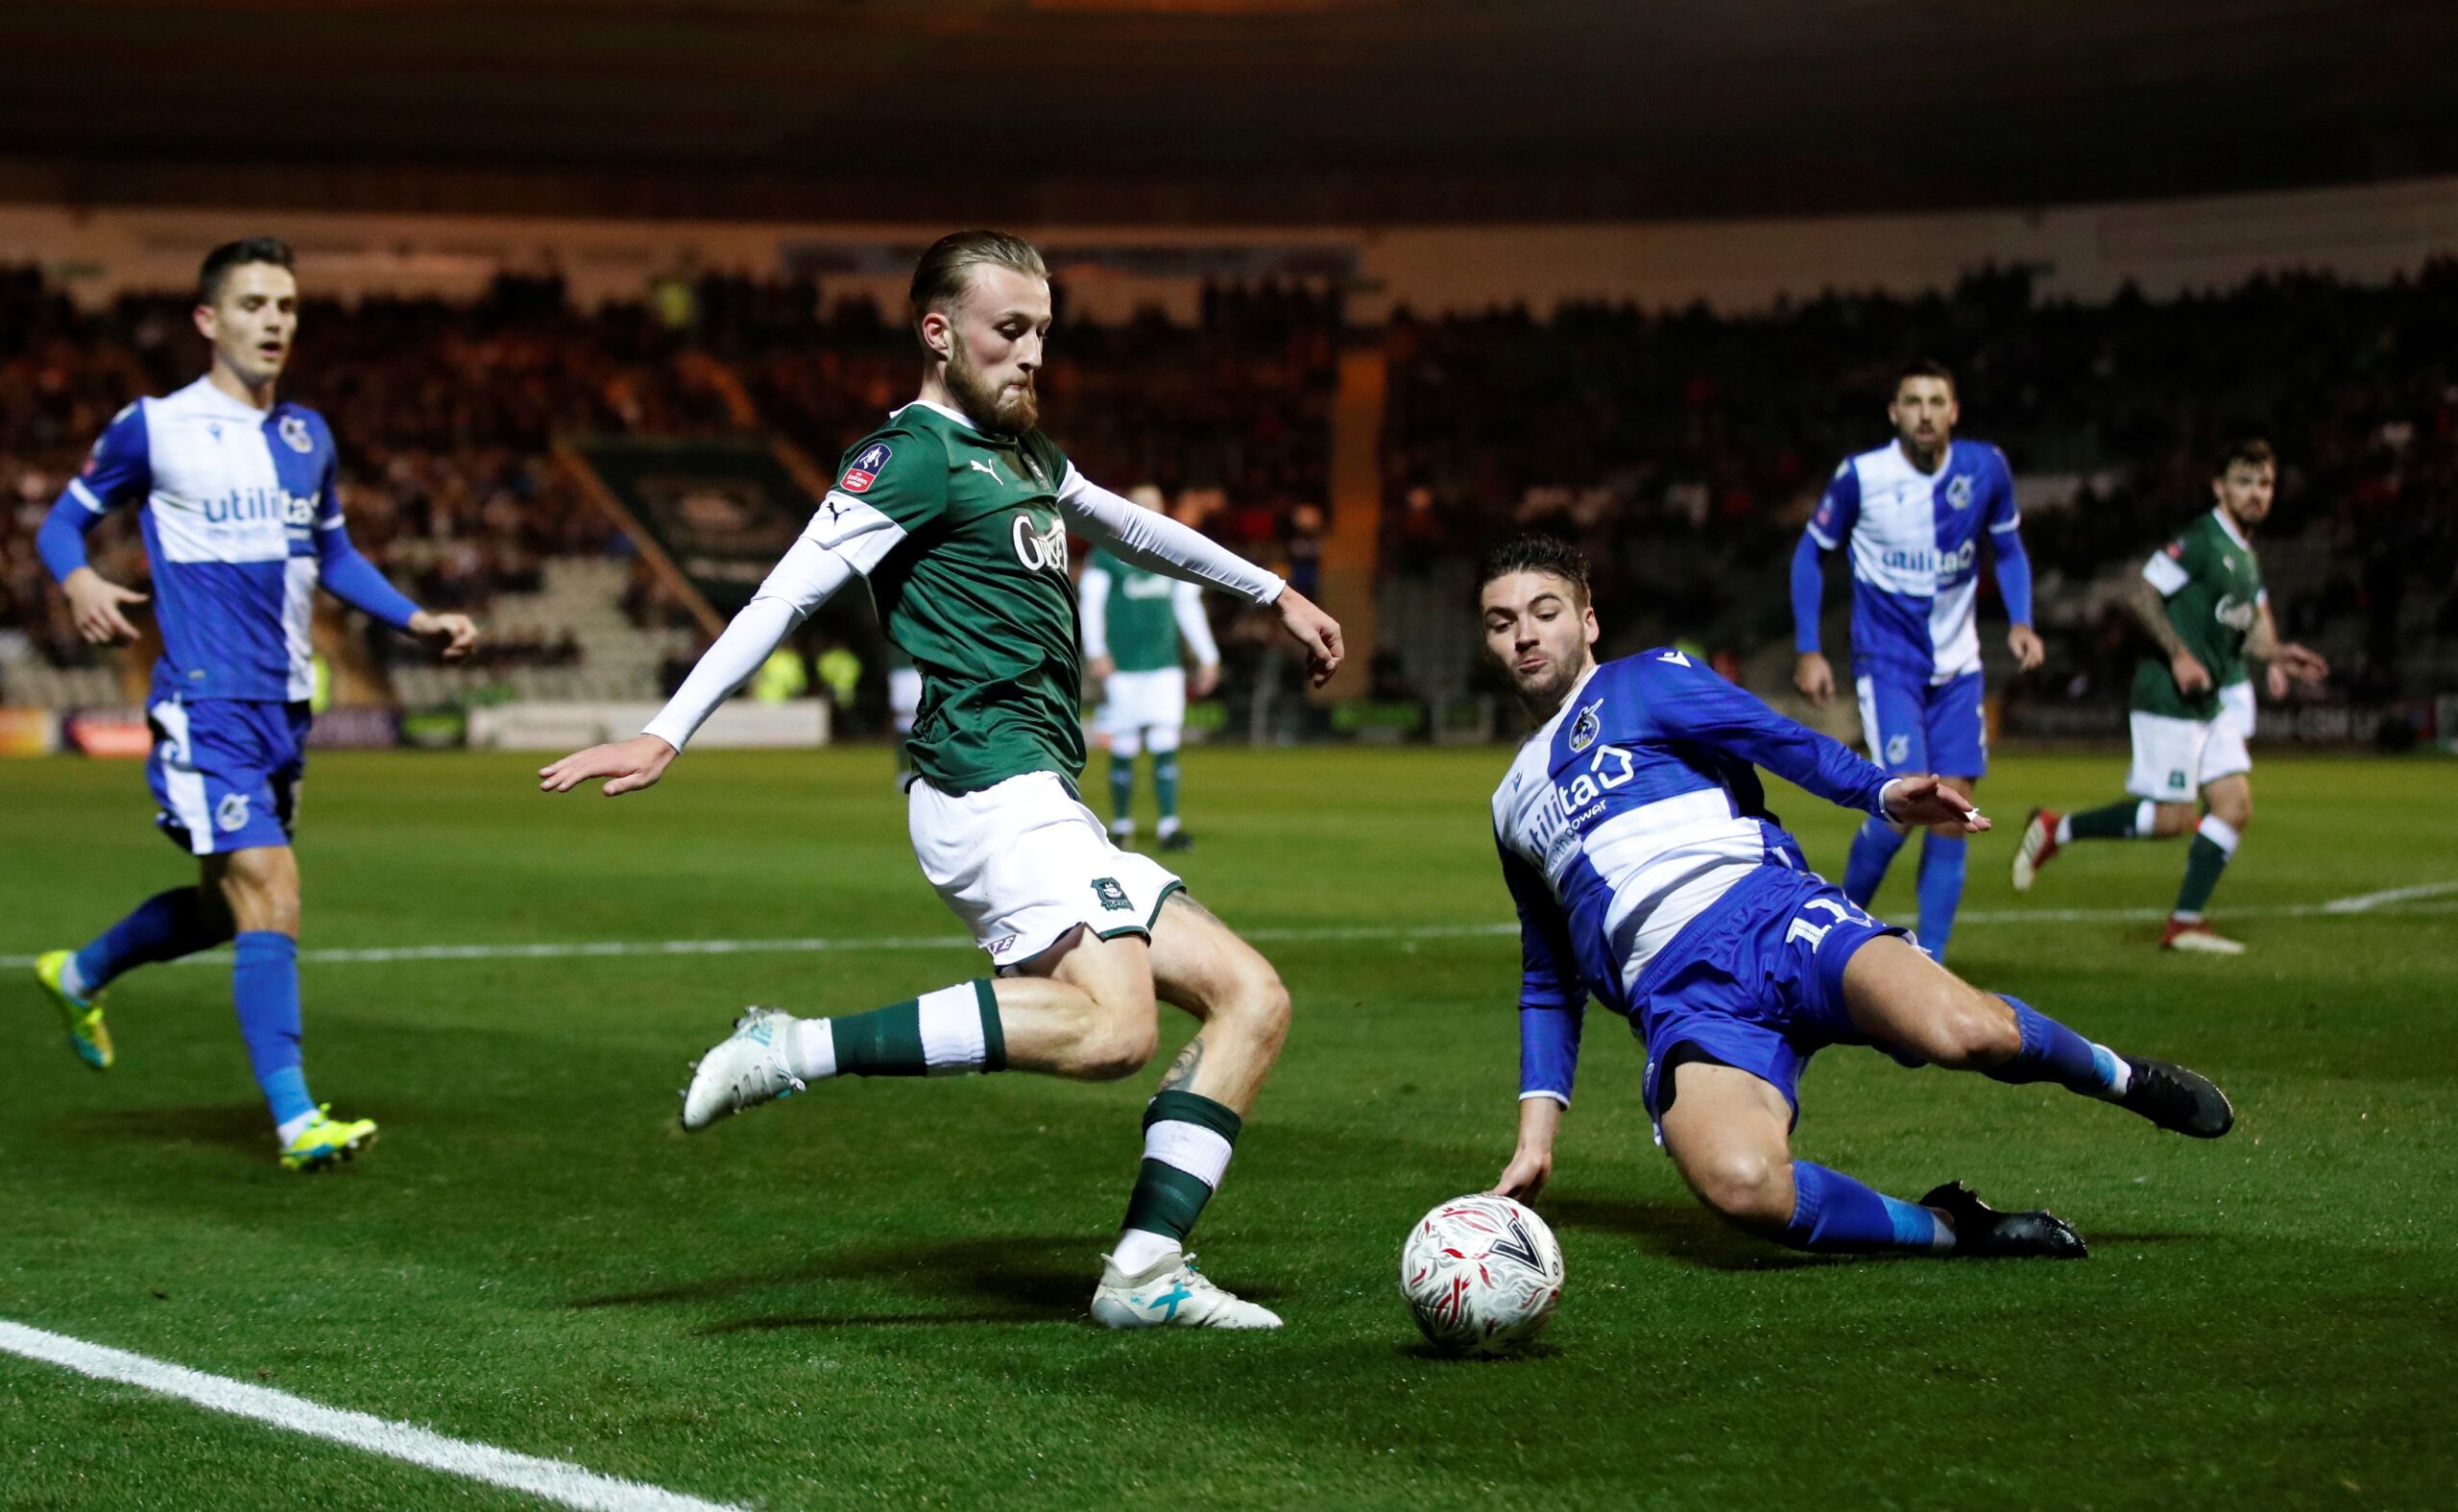 Soccer Football - FA Cup - Second Round Replay - Plymouth Argyle v Bristol Rovers - Home Park, Plymouth, Britain - December 17, 2019   Plymouth Argyle's George Cooper in action with Bristol Rovers' Luke Leahy   Action Images/Peter Cziborra